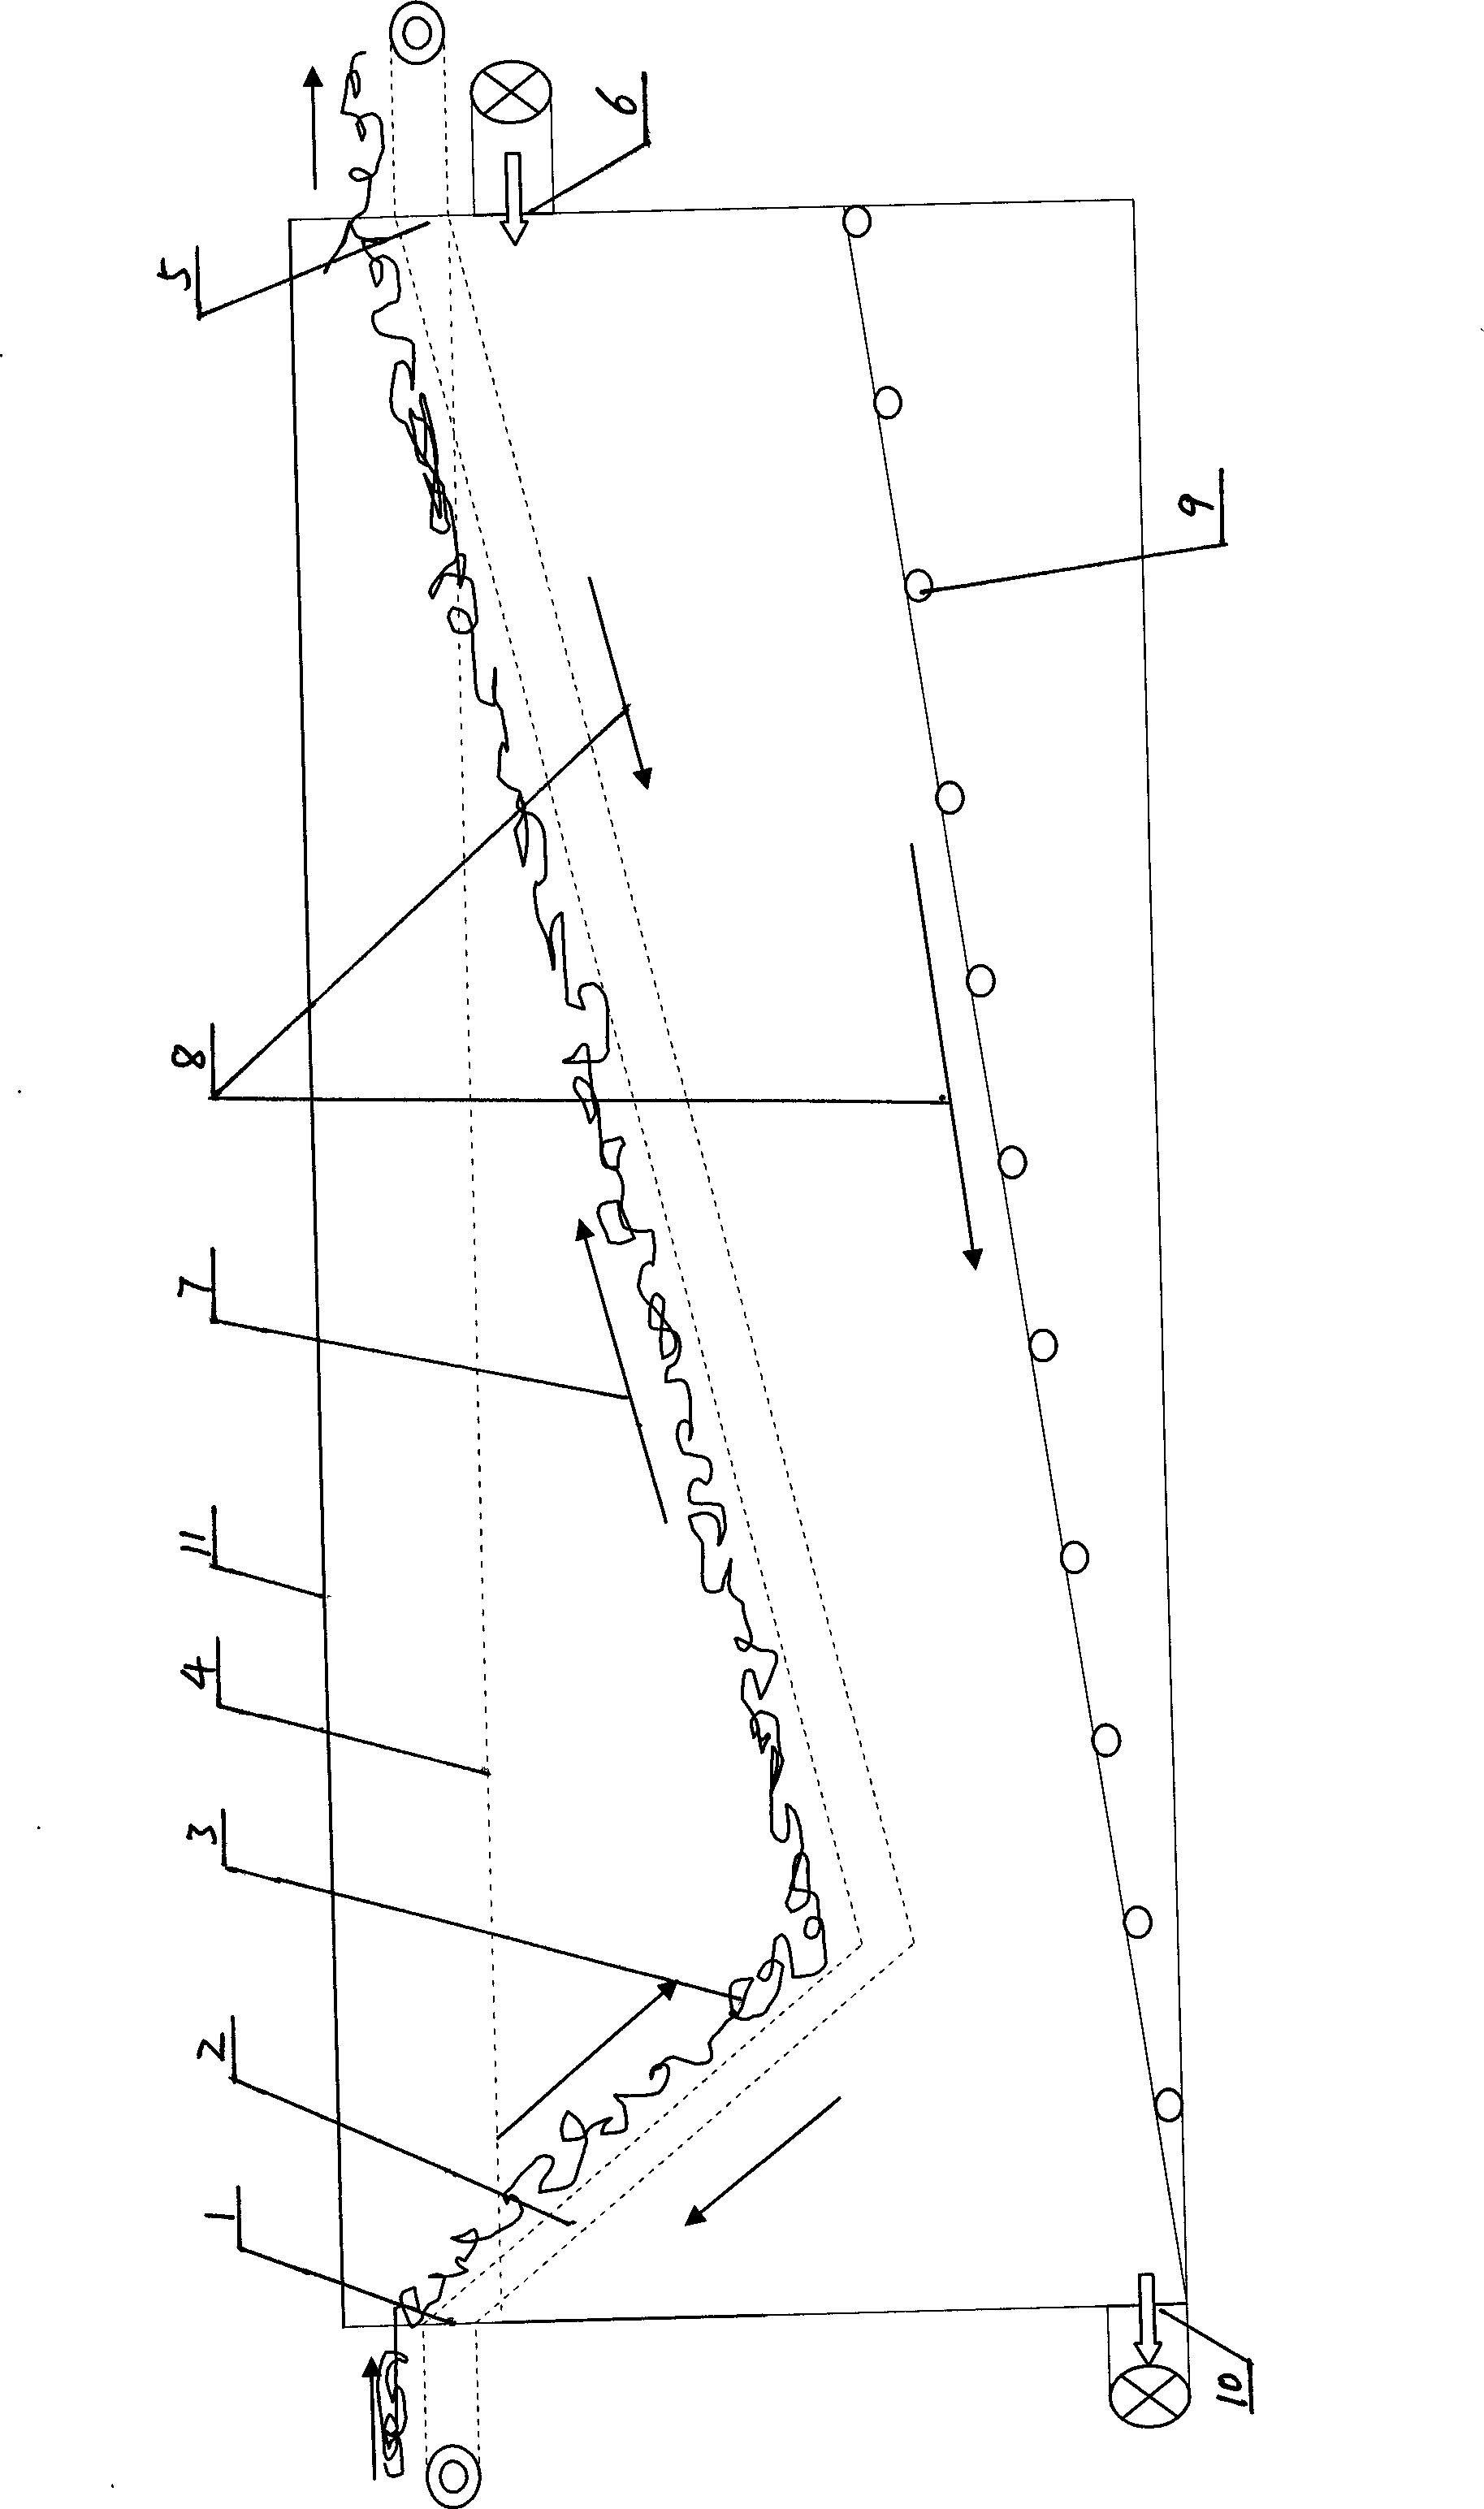 Tobacco leaf pretreatment method during tobacco primary processing